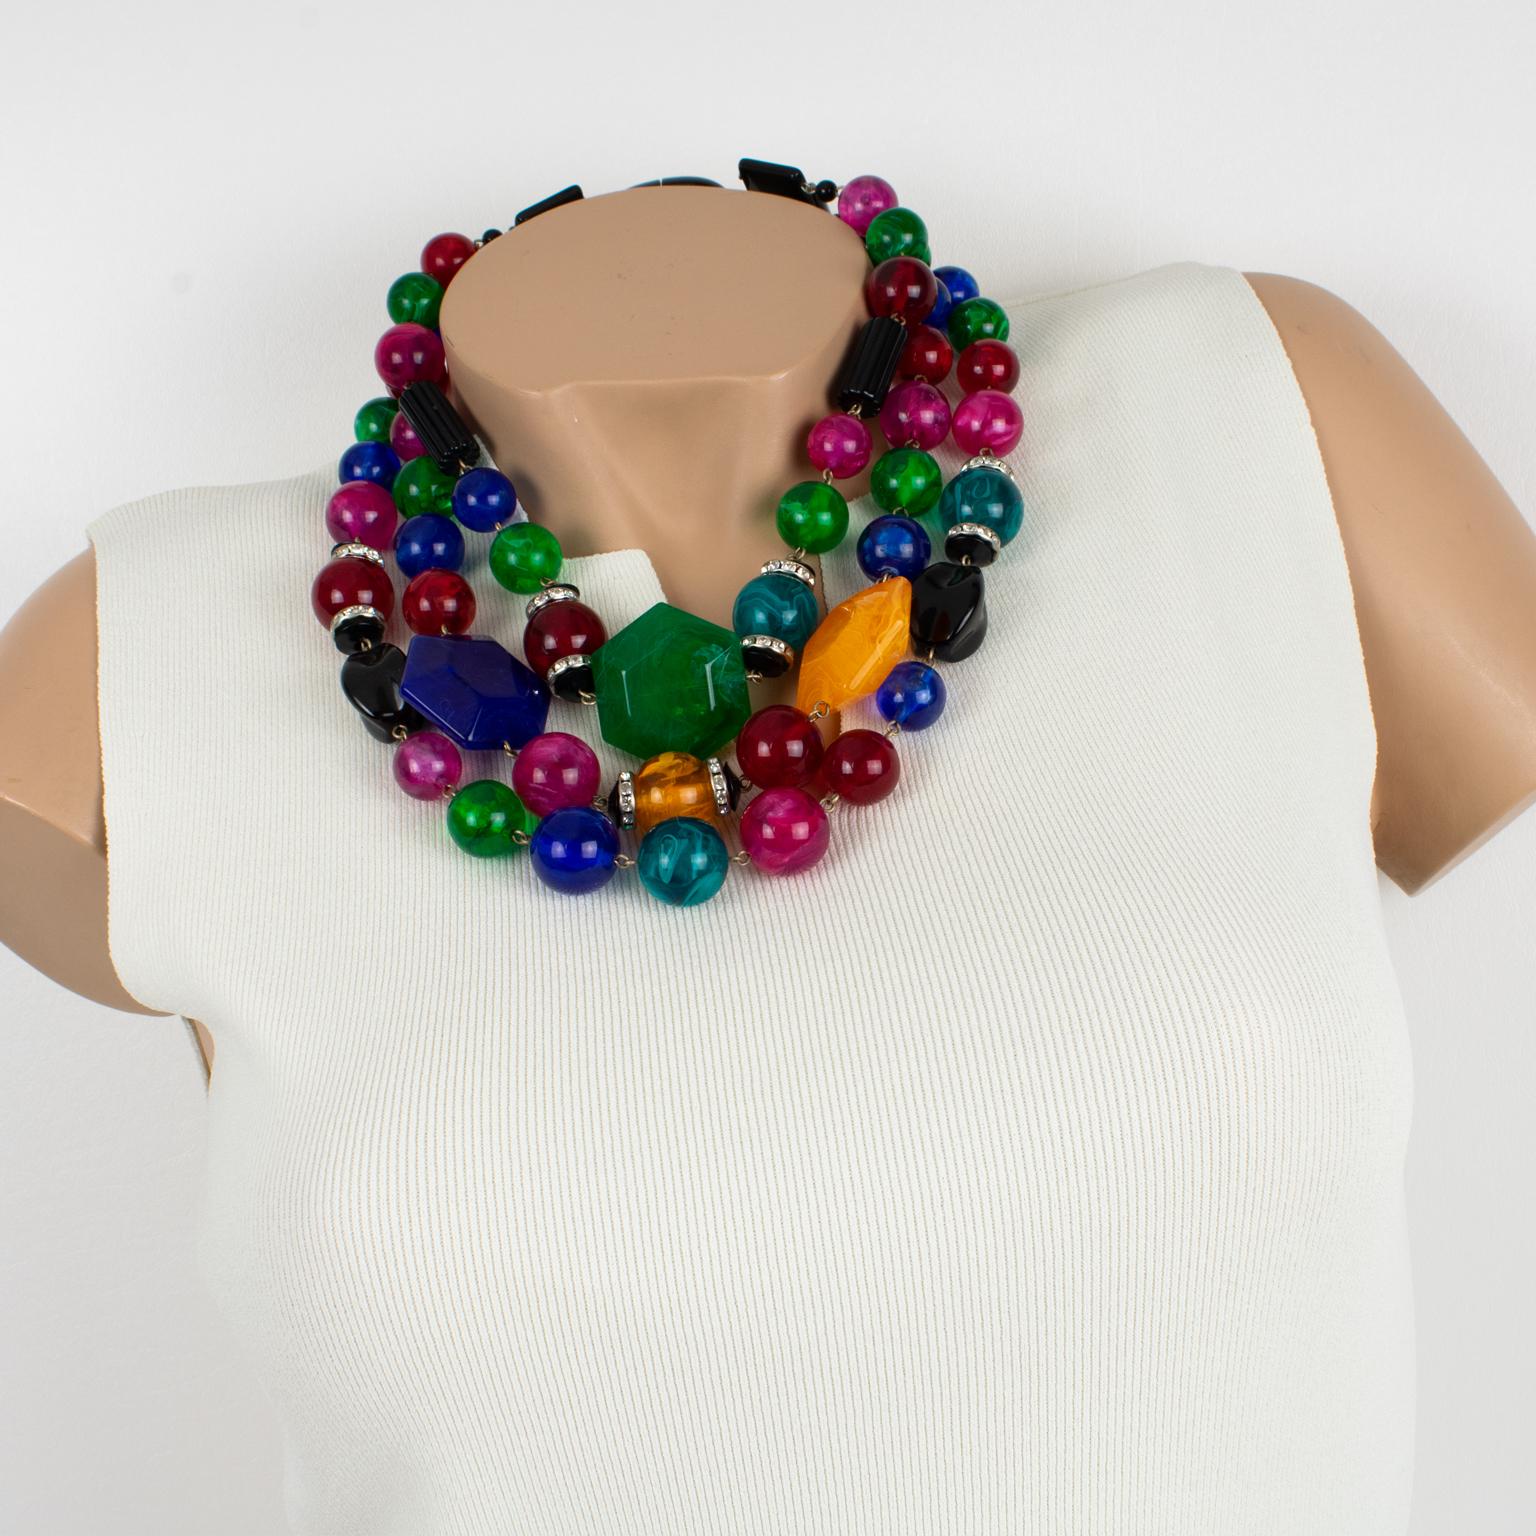 Superb Angela Caputi, made in Italy resin choker beaded necklace. Features a fruit salad beads multi-strand design with contrasting black beads and tiny crystal rhinestones spacer beads. 
A large selection of assorted colors in navy blue, emerald